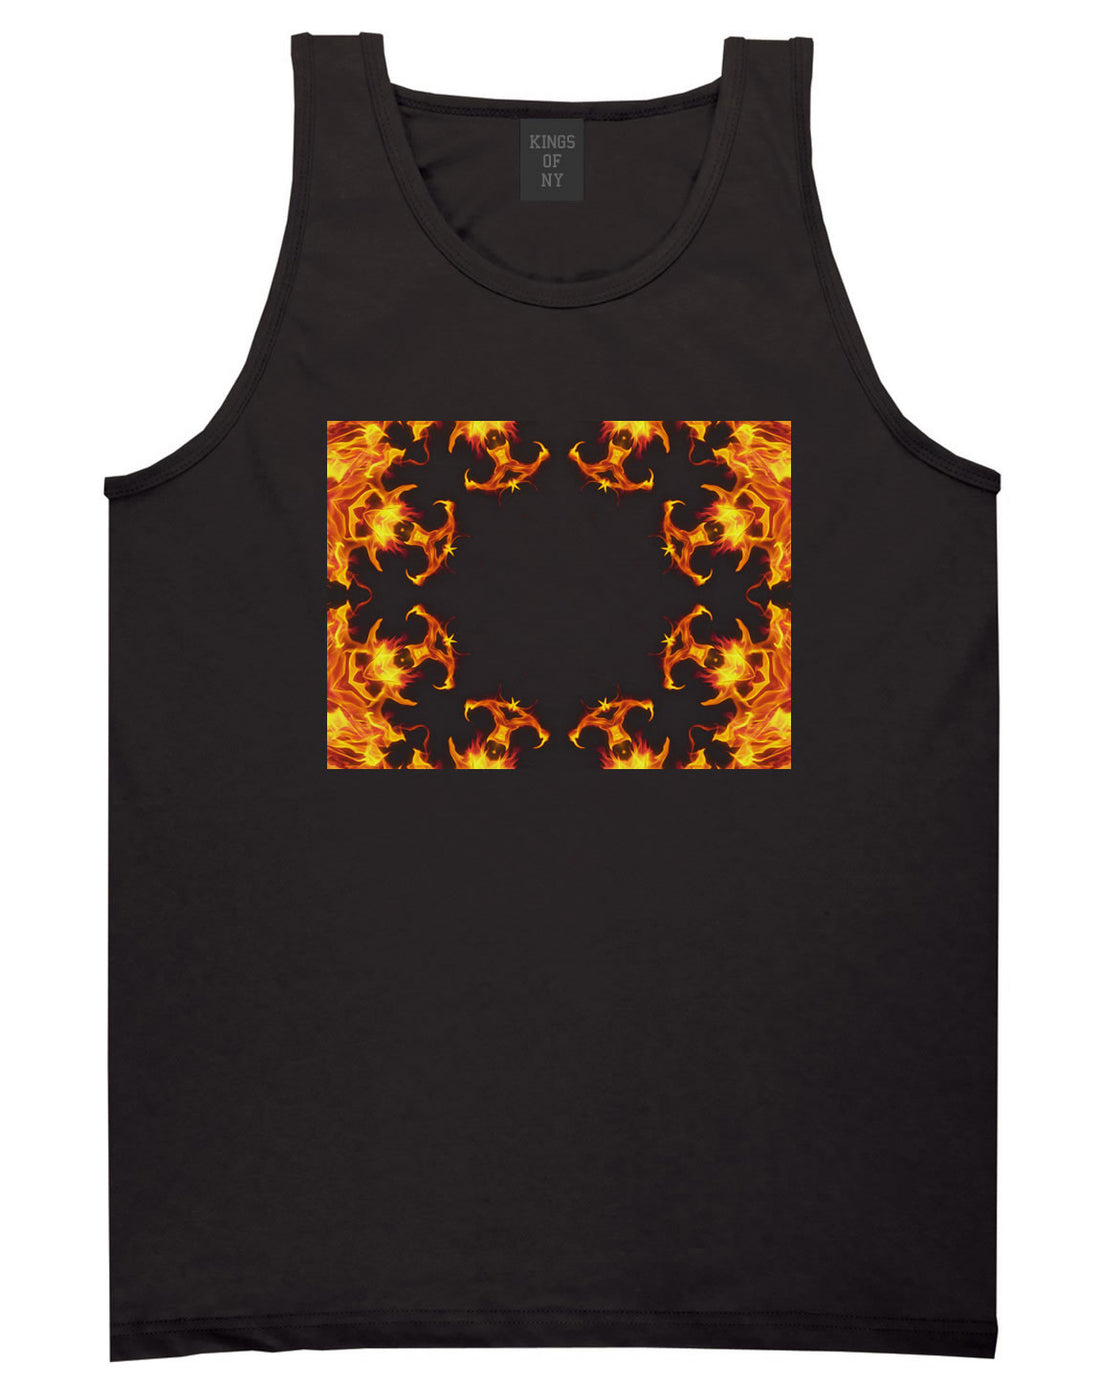 Flames of Fire Gold Frame Tank Top in Black By Kings Of NY